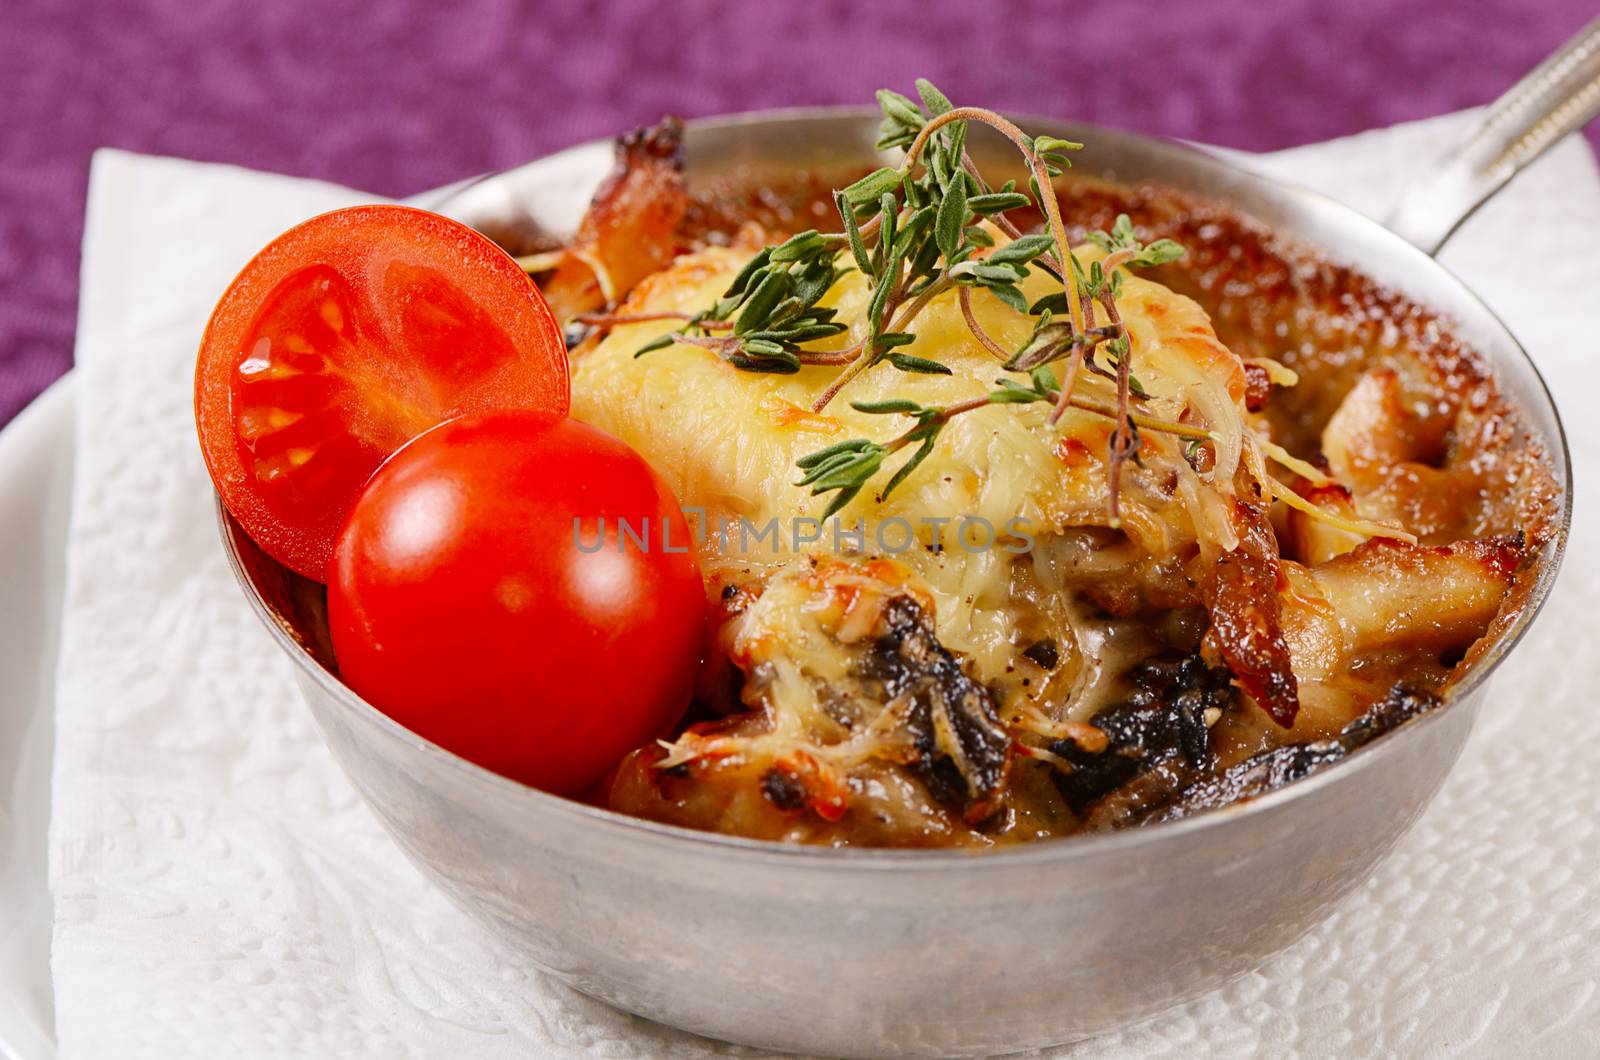 Julienne with chicken, mushrooms and cheese by SvetaVo